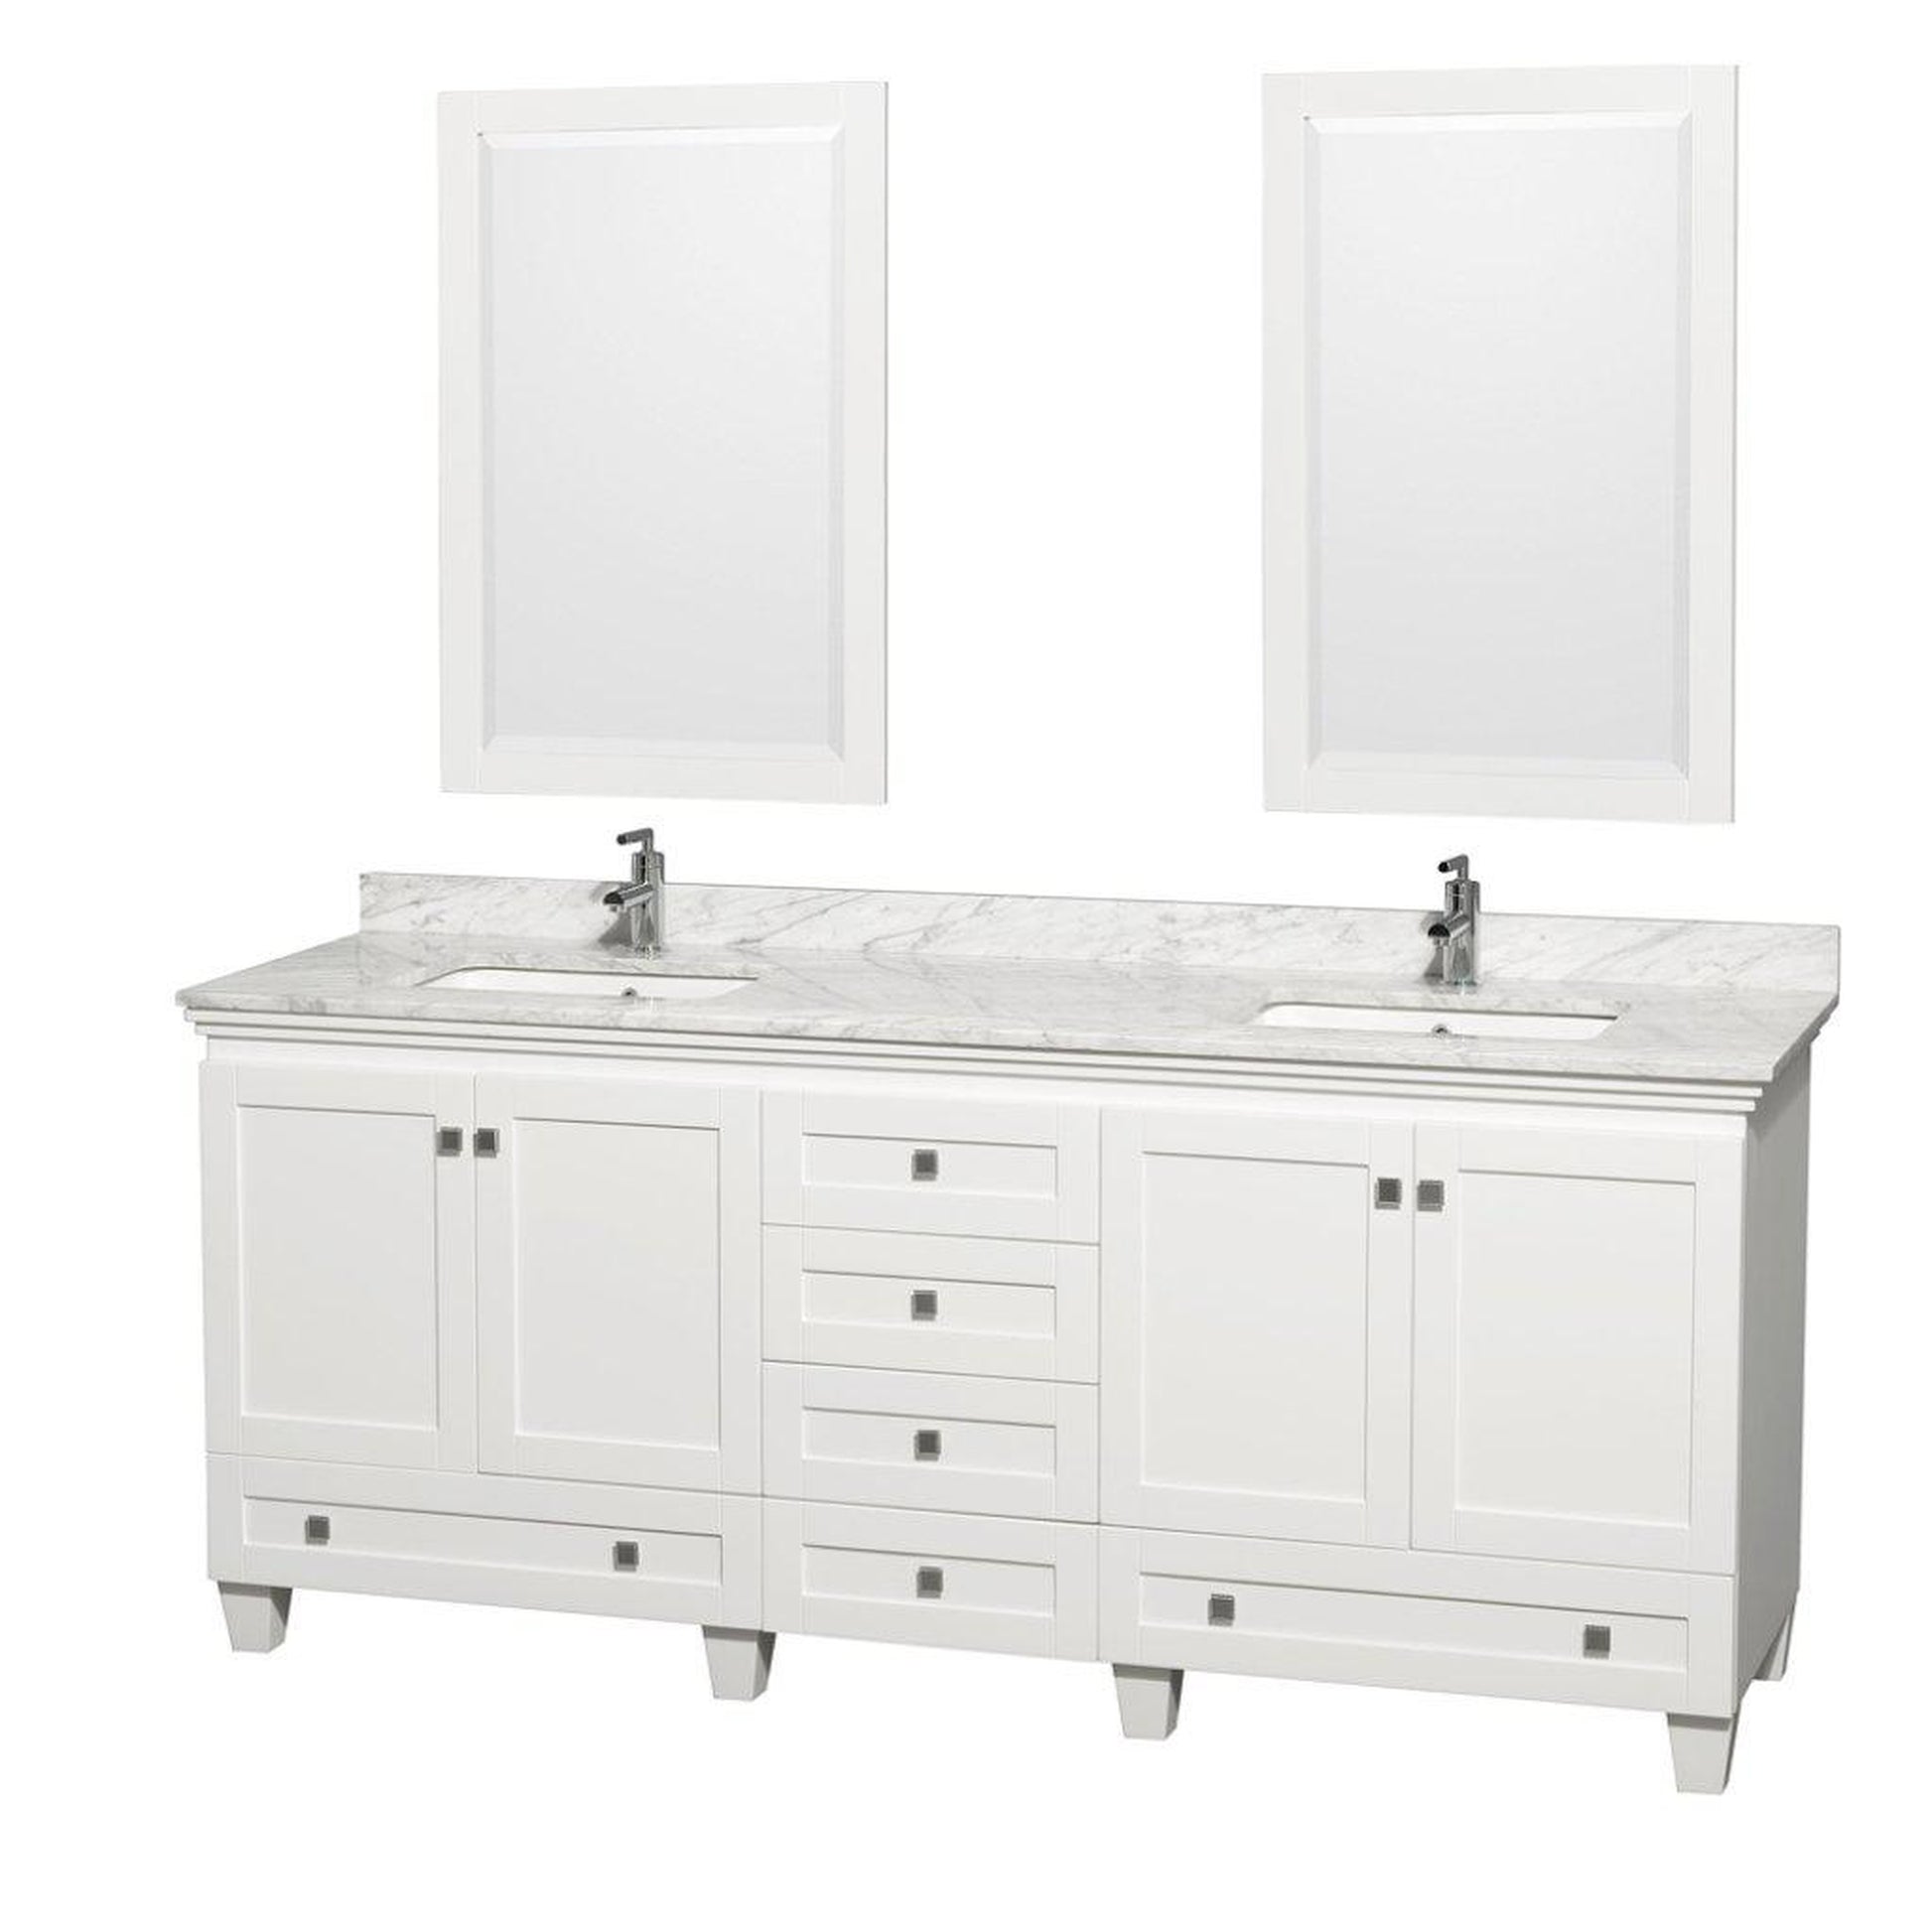 Wyndham Collection Acclaim 80" Double Bathroom White Vanity With White Carrara Marble Countertop And Undermount Square Sinks And 2 Set Of 24" Mirror